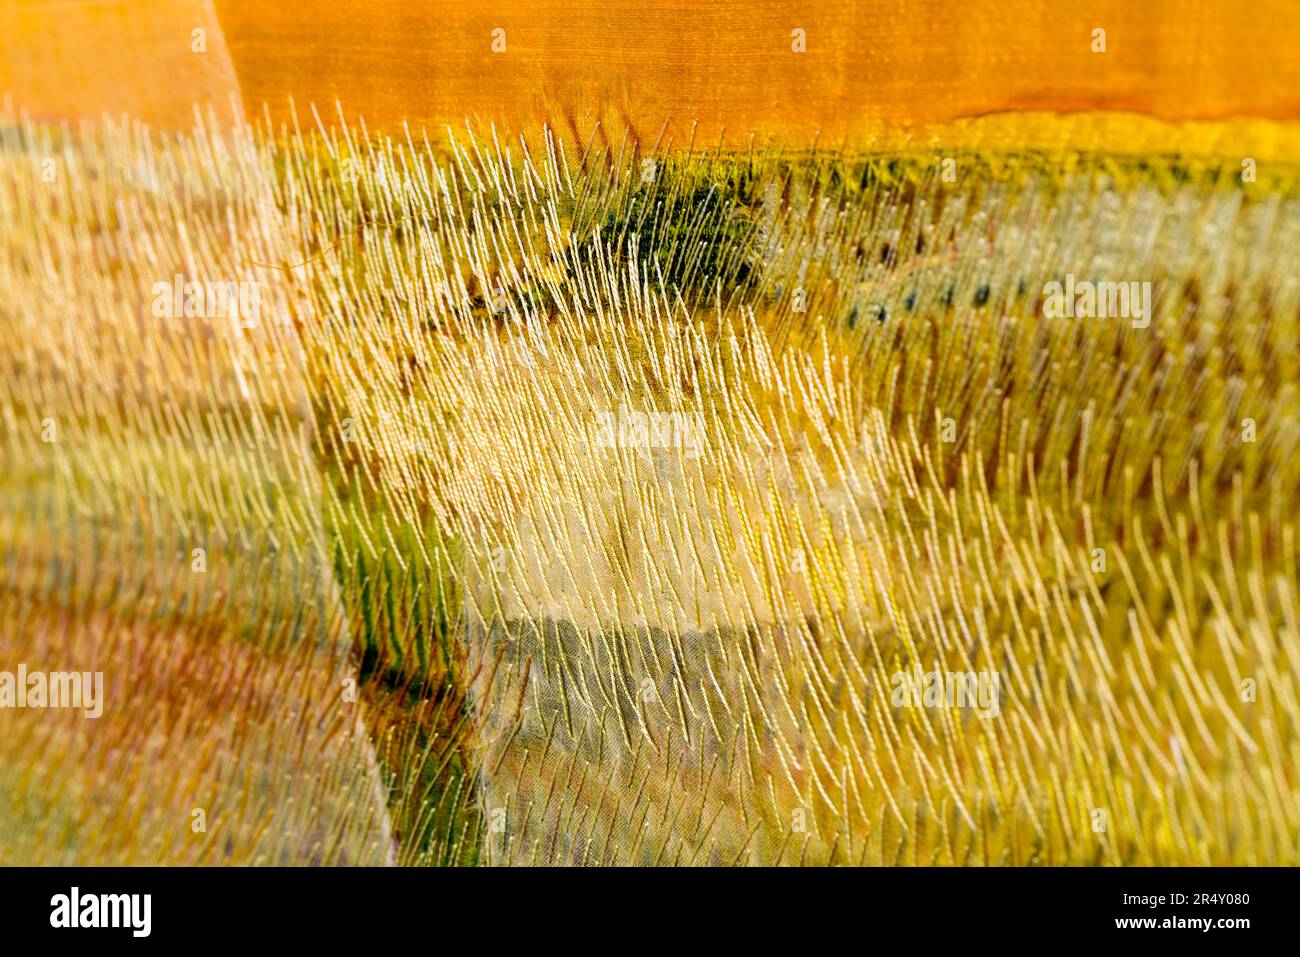 Colorful abstract close-up of fiber art piece Stock Photo